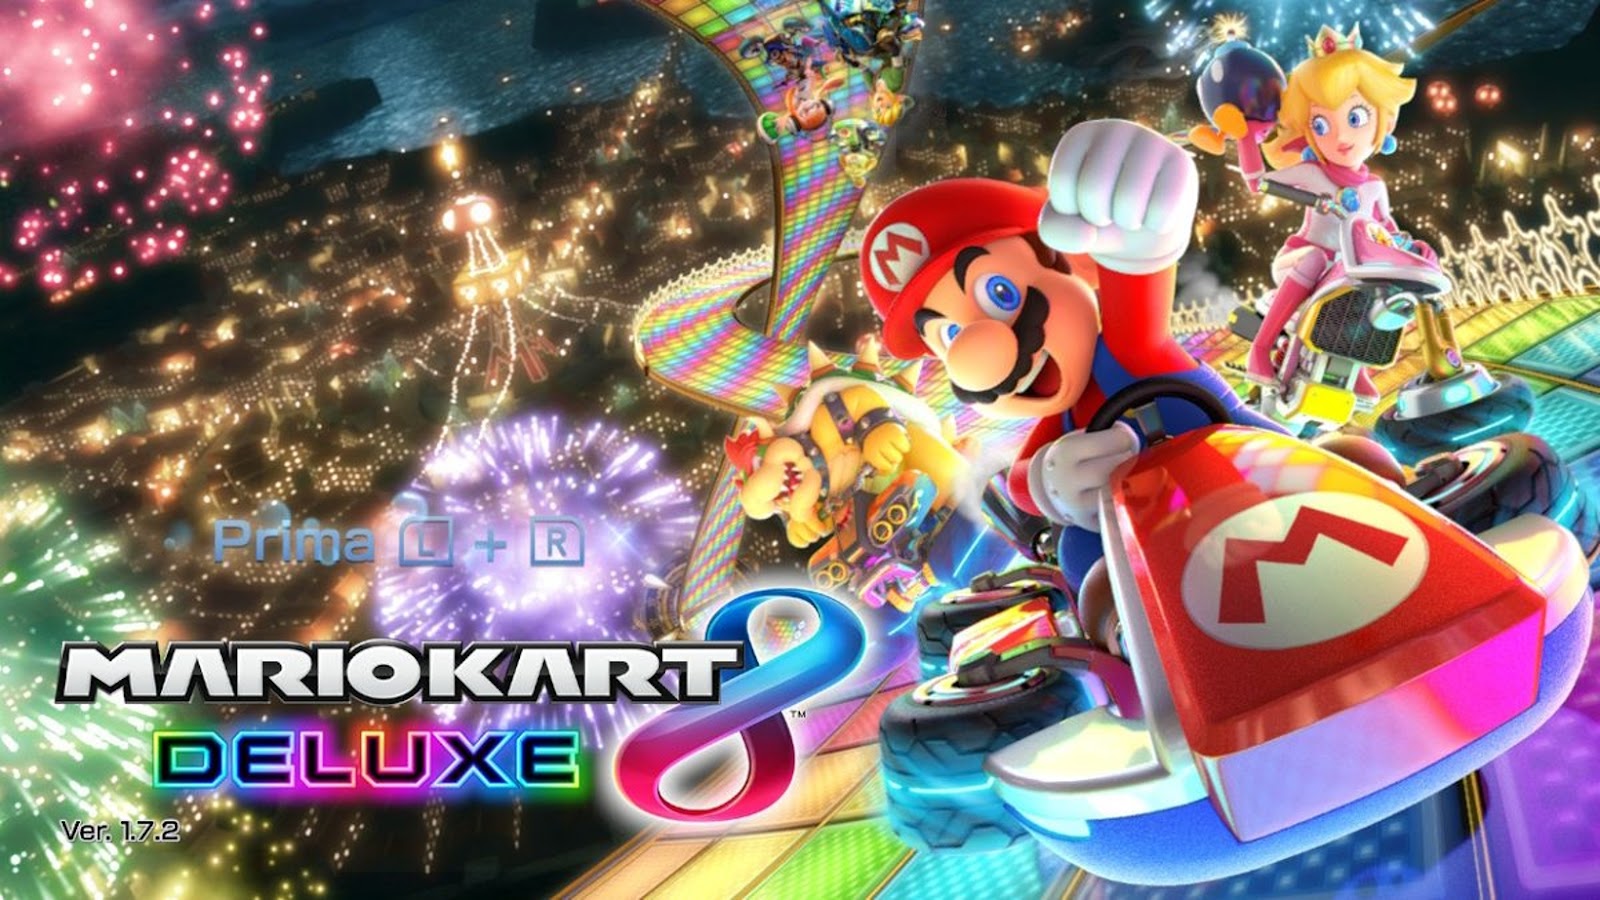 How To Get Stars In Mario Kart 8 By Using Cheats And Hacks